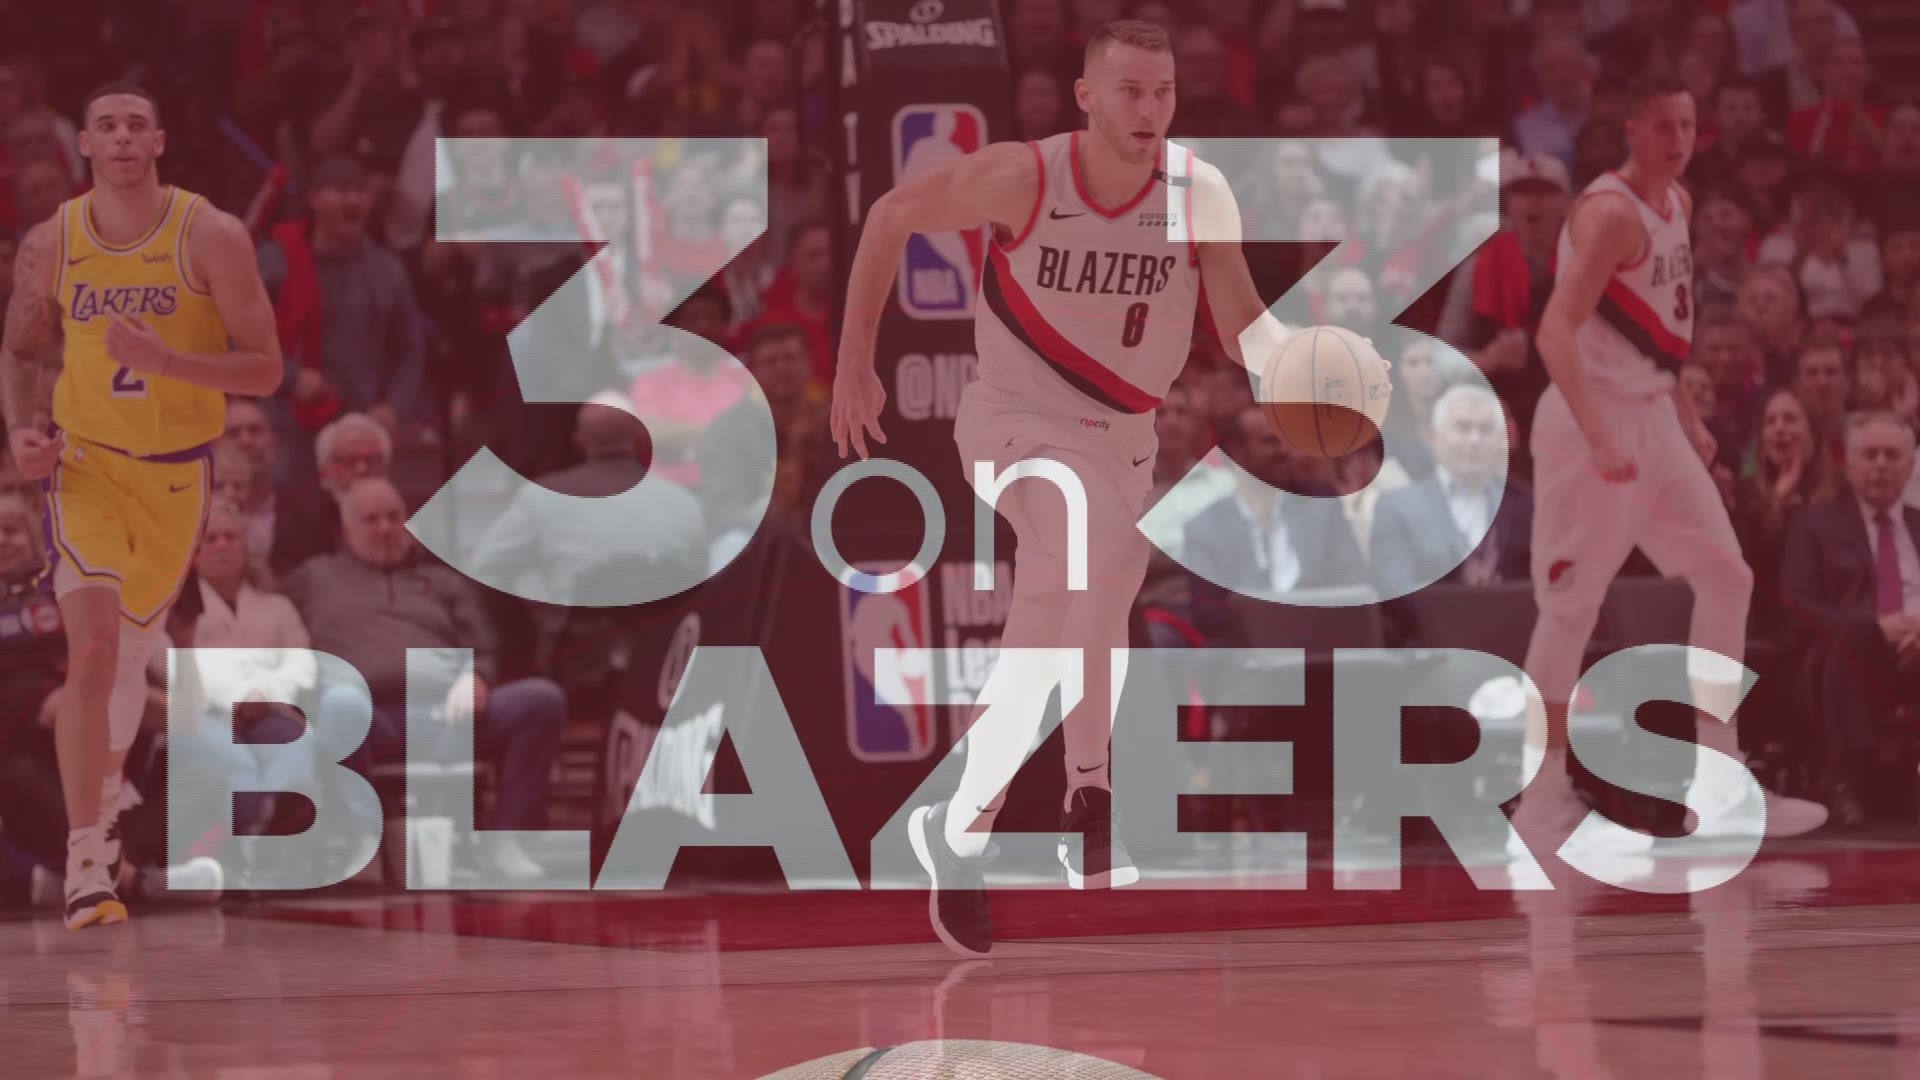 A short tease from the 3-on-3 Blazers podcast, in which co-host Jared Cowley talked -- before the season began -- why he thought Nik Stauskas would surprise Blazers fans this season.